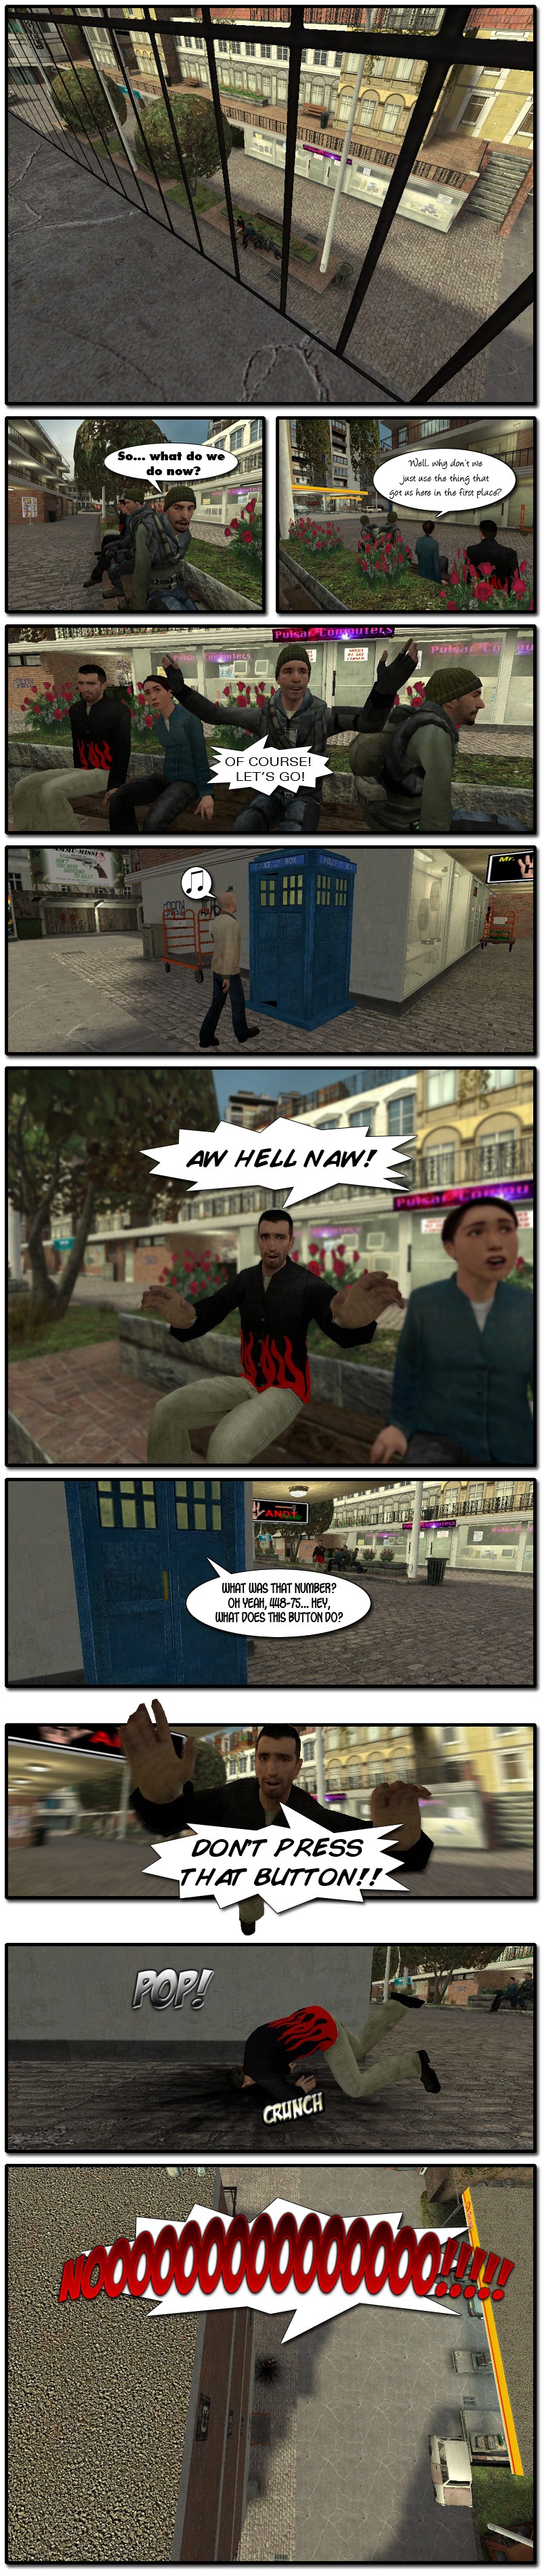 Jeff and friends are sitting in a bench in the 1996 city downtown. John asks the rest what do they do now. Jennifer suggests using the thing that got them there in the first place. Jerry exclaims of course, let's go. Just then, a civilian approaches the TARDIS, thinking it's a phone booth. Jeff screams aw hell no. The civilian notices a button in the TARDIS. Jeff leaps at the TARDIS, screaming don't press that button, but it's too late. The TARDIS vanishes and Jeff falls on the ground, then screams a long, pained no.